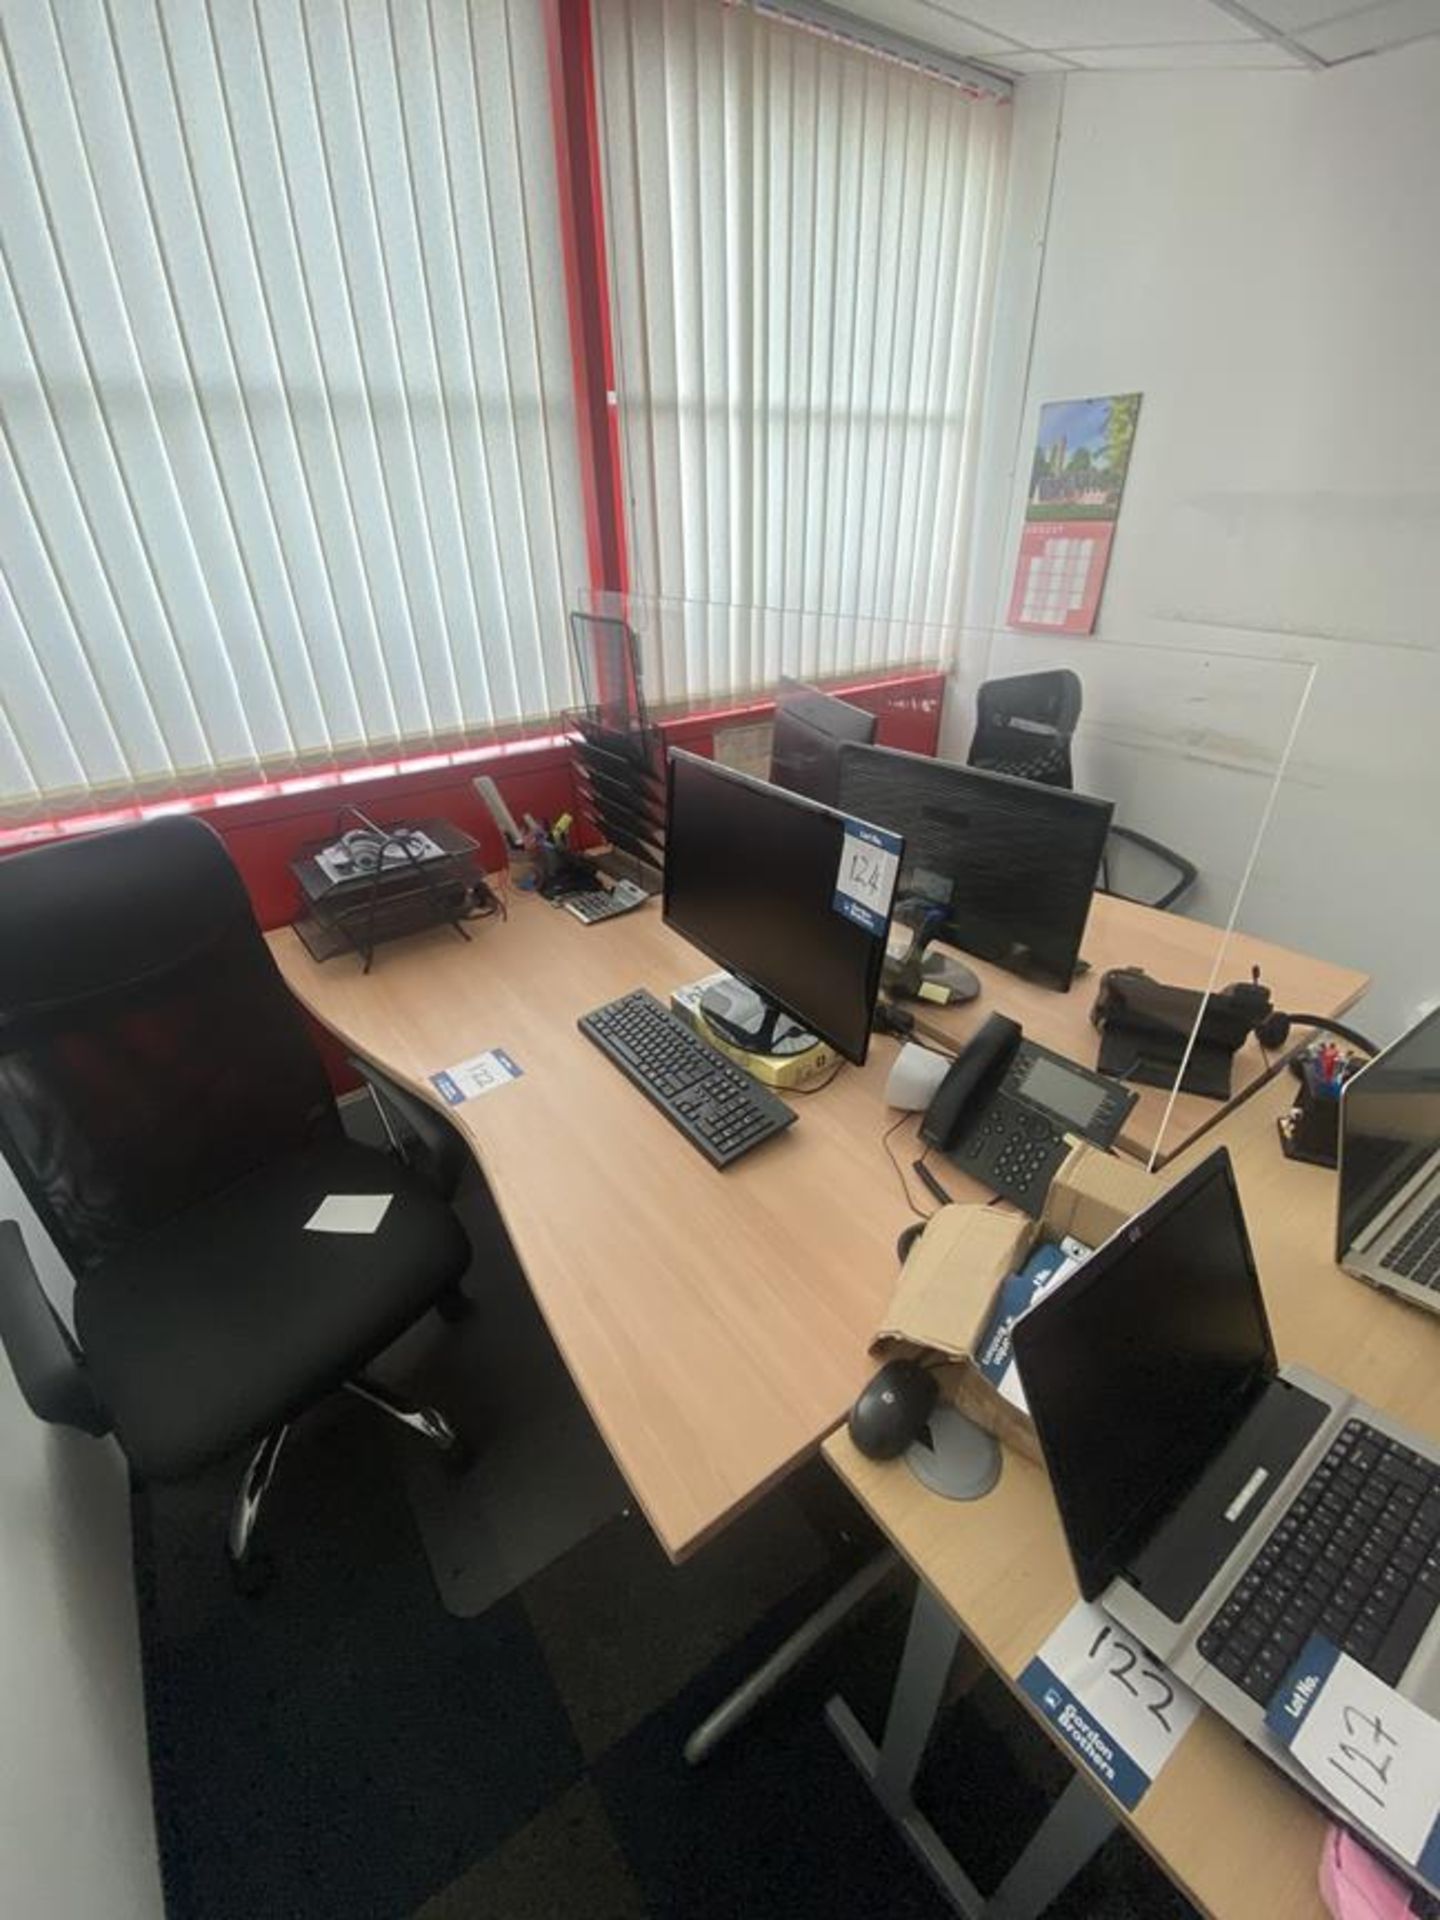 3 No laminate workstations and 2 operators chairs